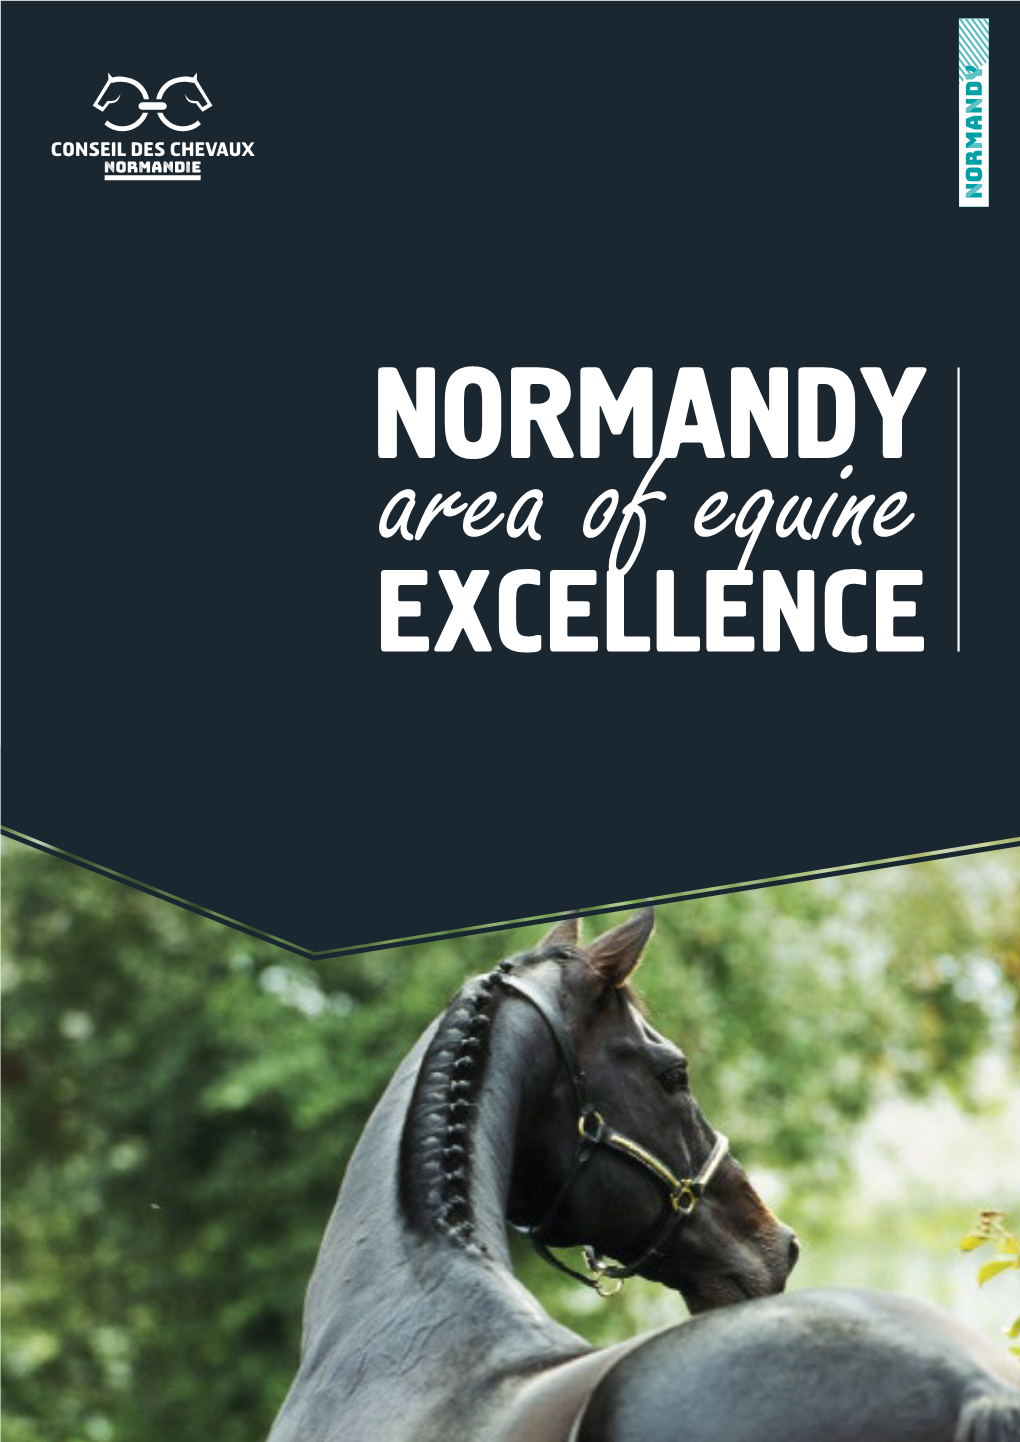 Normandy, Area of Equine Excellence 14460 COLOMBELLES (France)